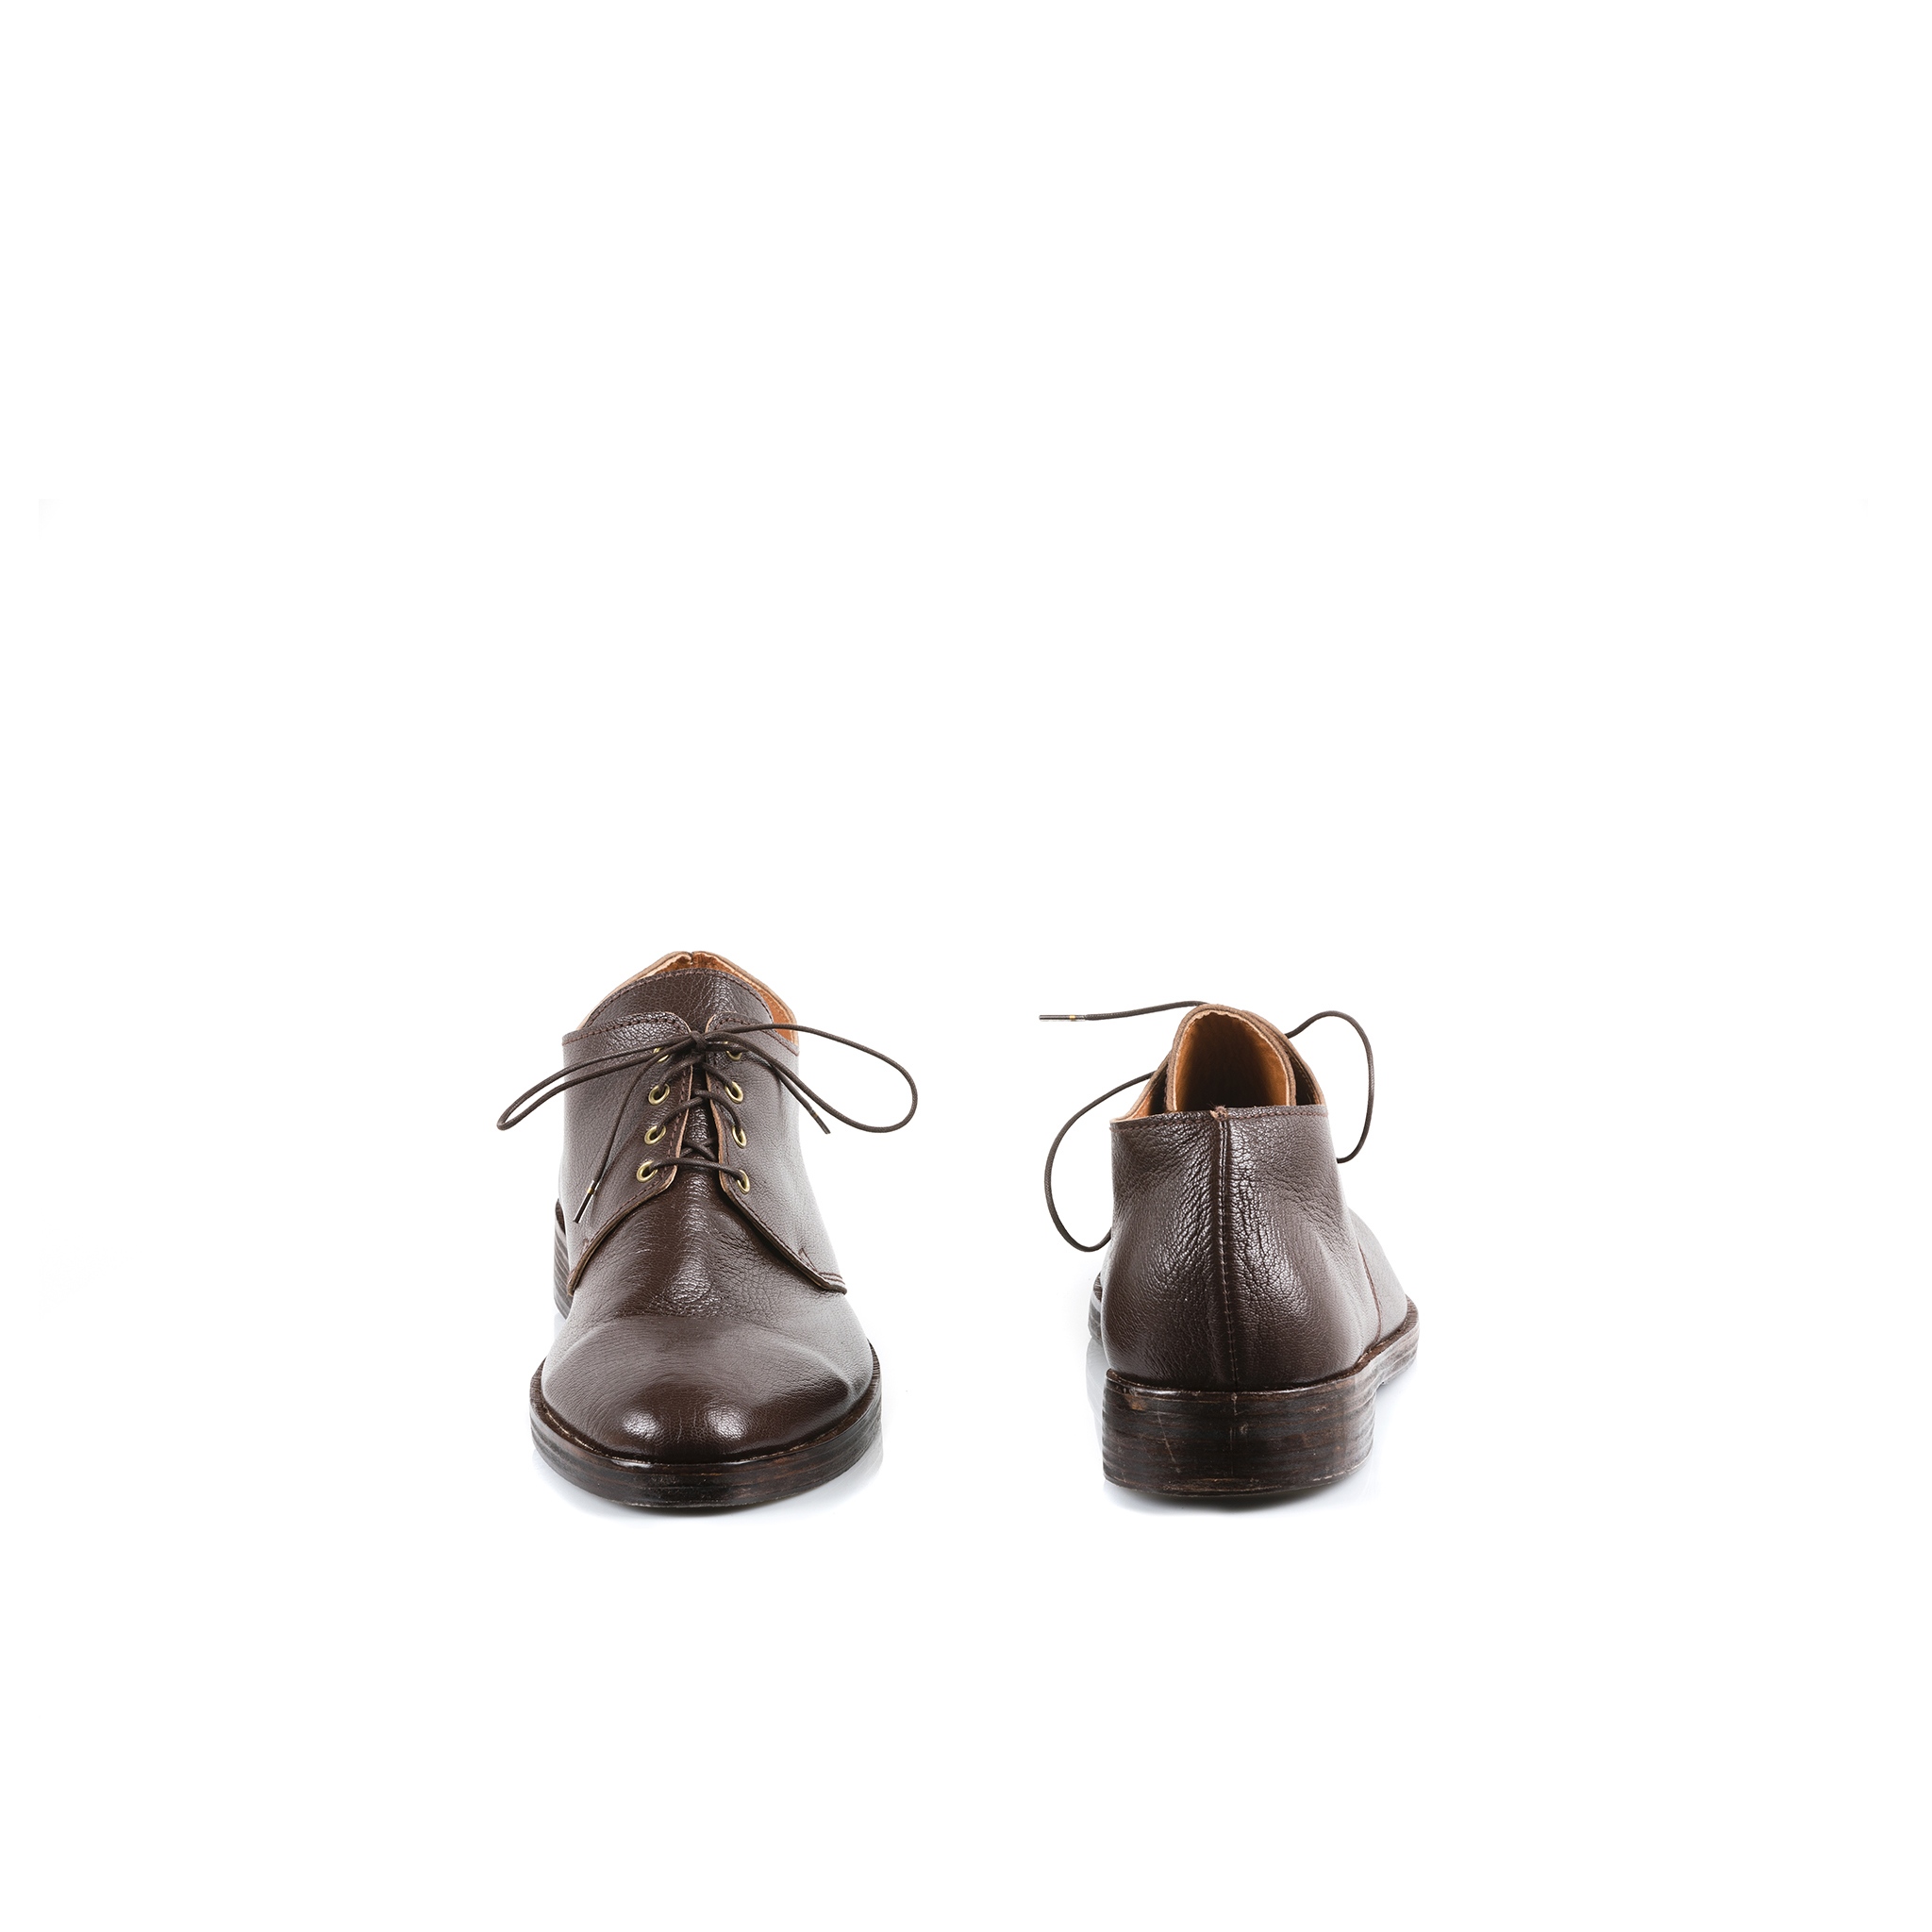 Simone Derby Shoes - Glossy leather - Brown color